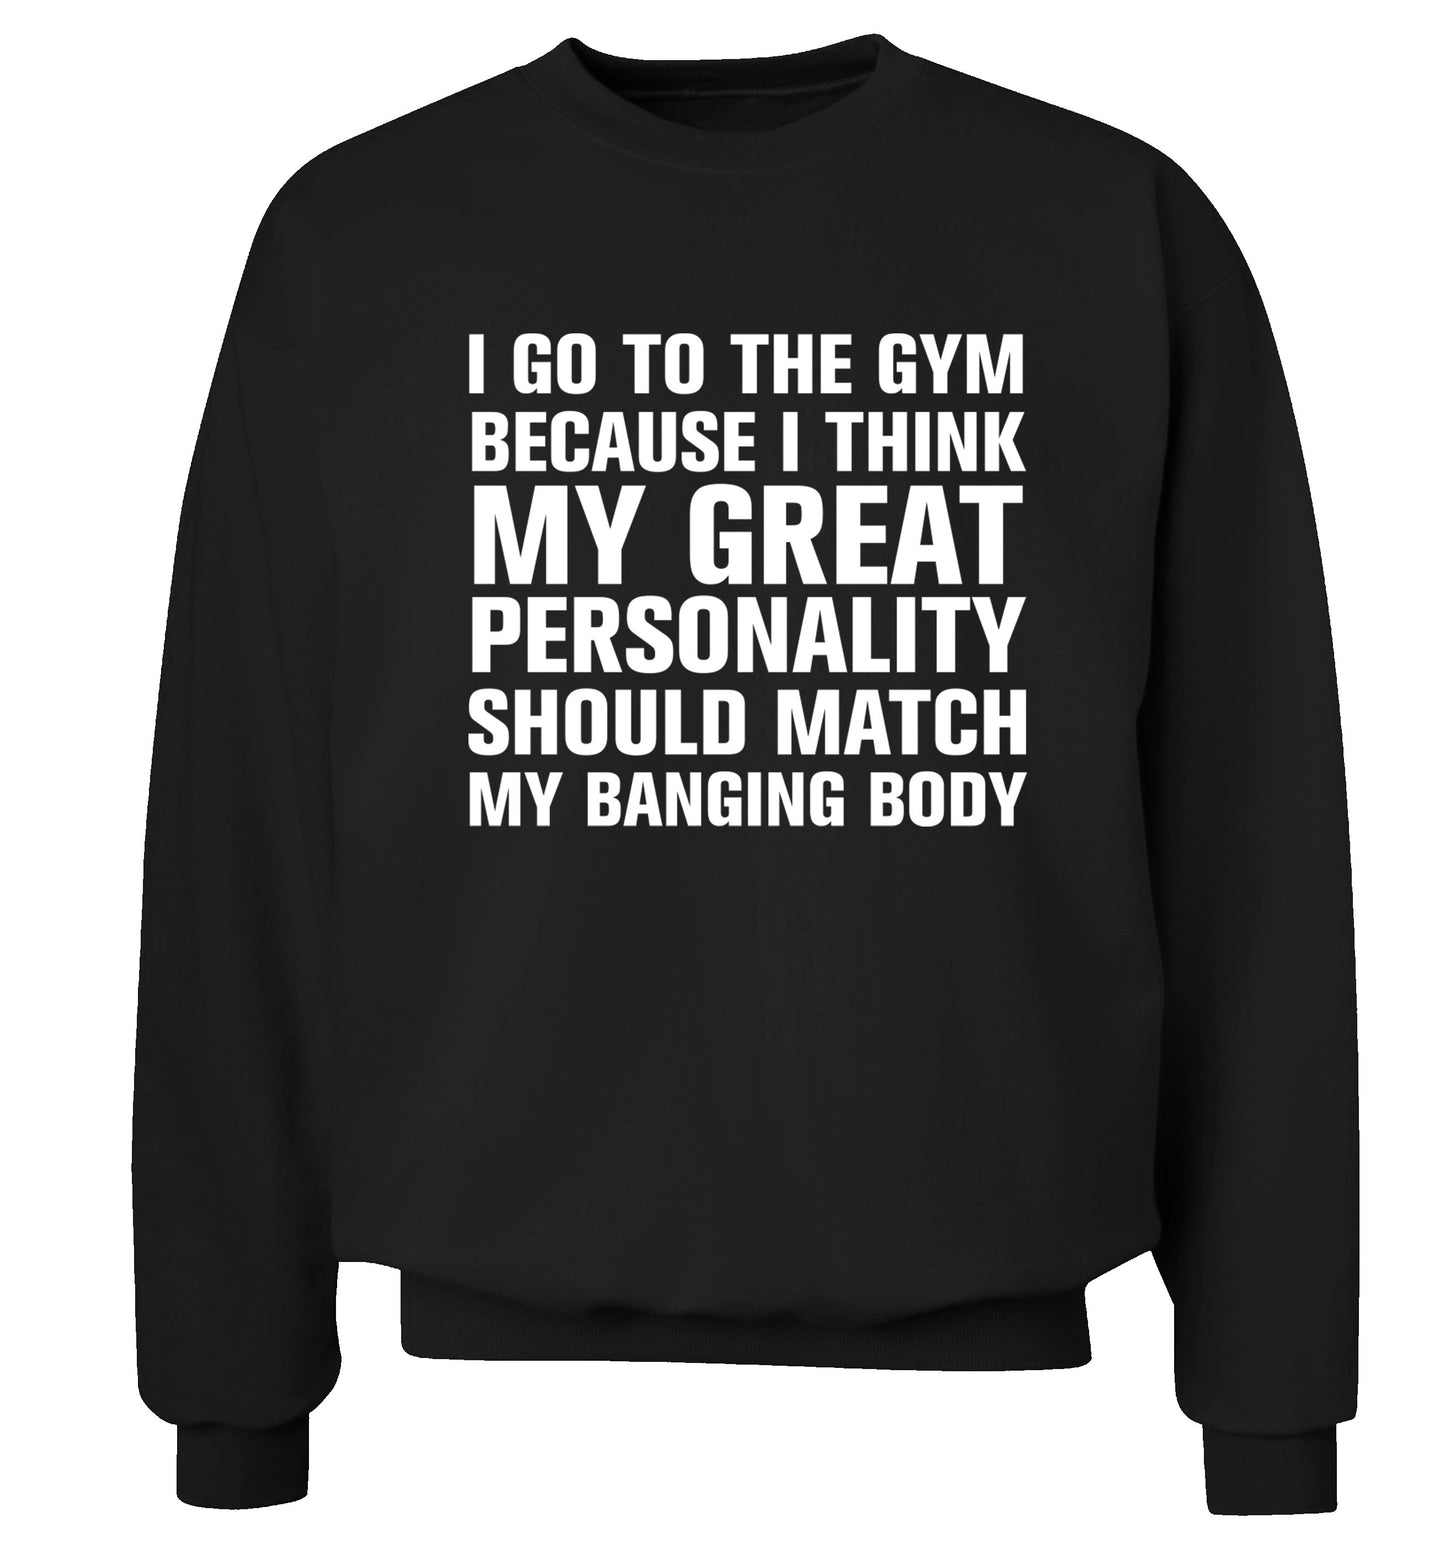 I go to the gym because I think my great personality should match my banging body Adult's unisex black Sweater 2XL